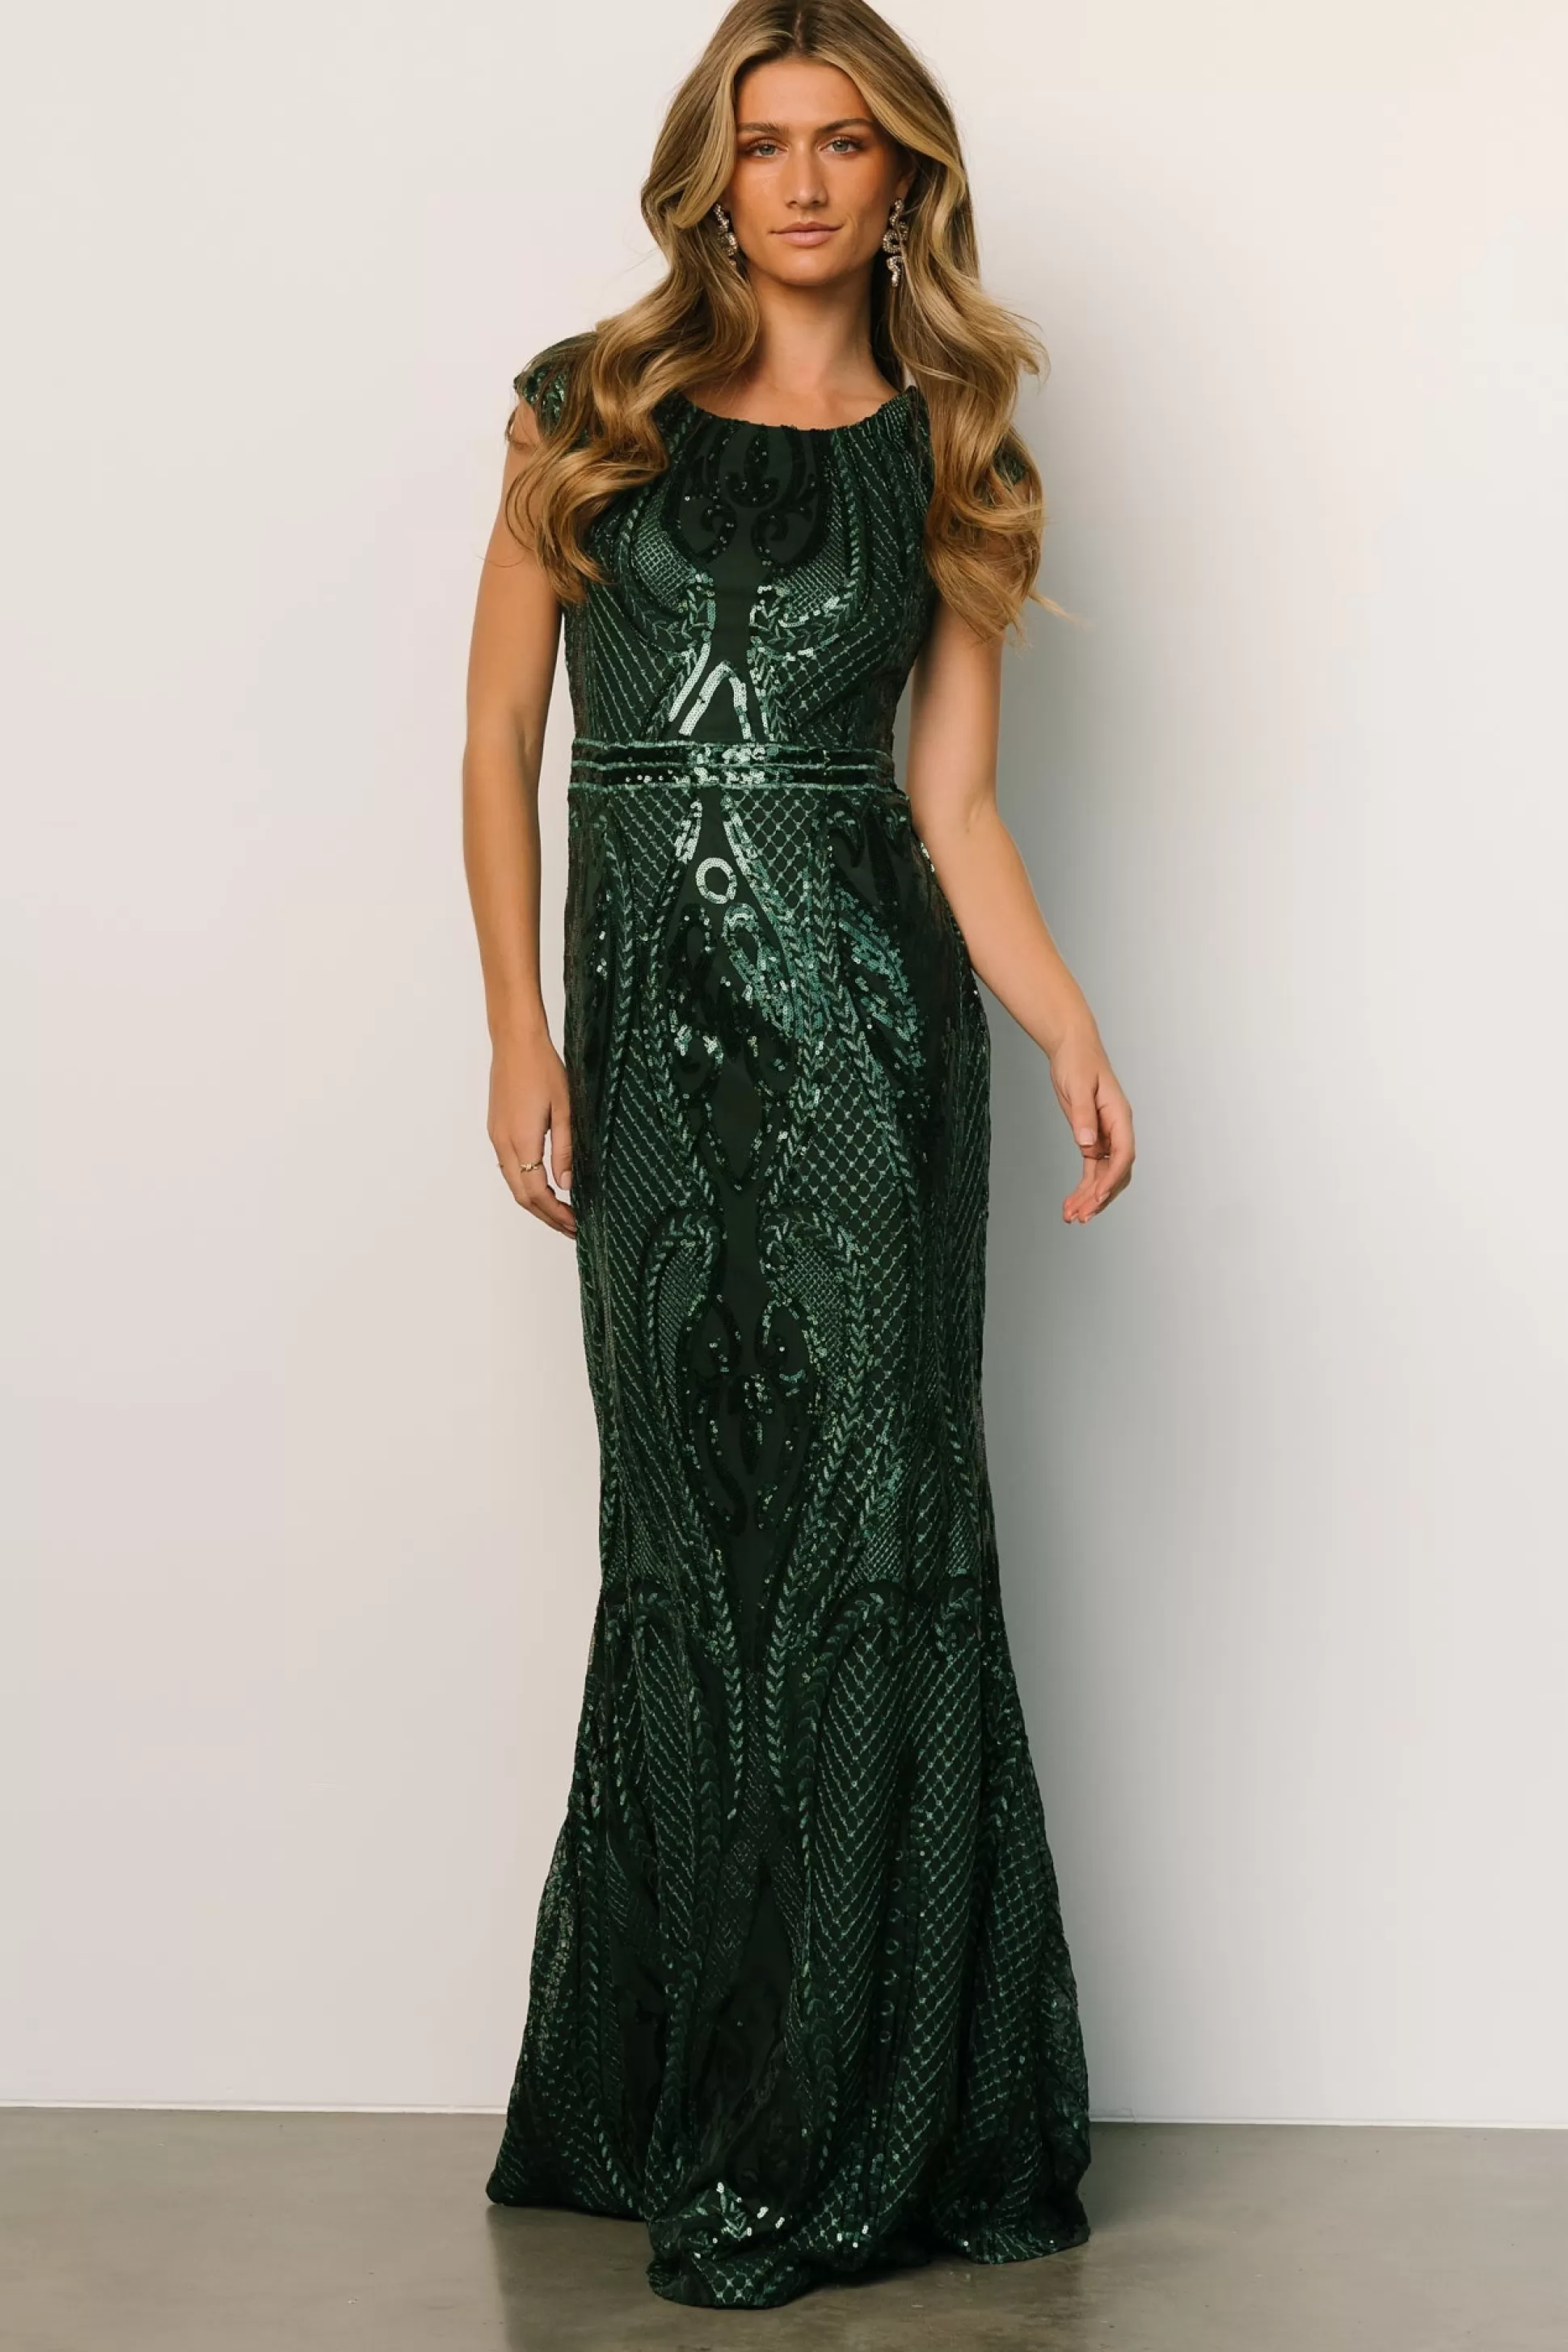 embellished + sequined | Baltic Born Alessia Sequin Gown | Green